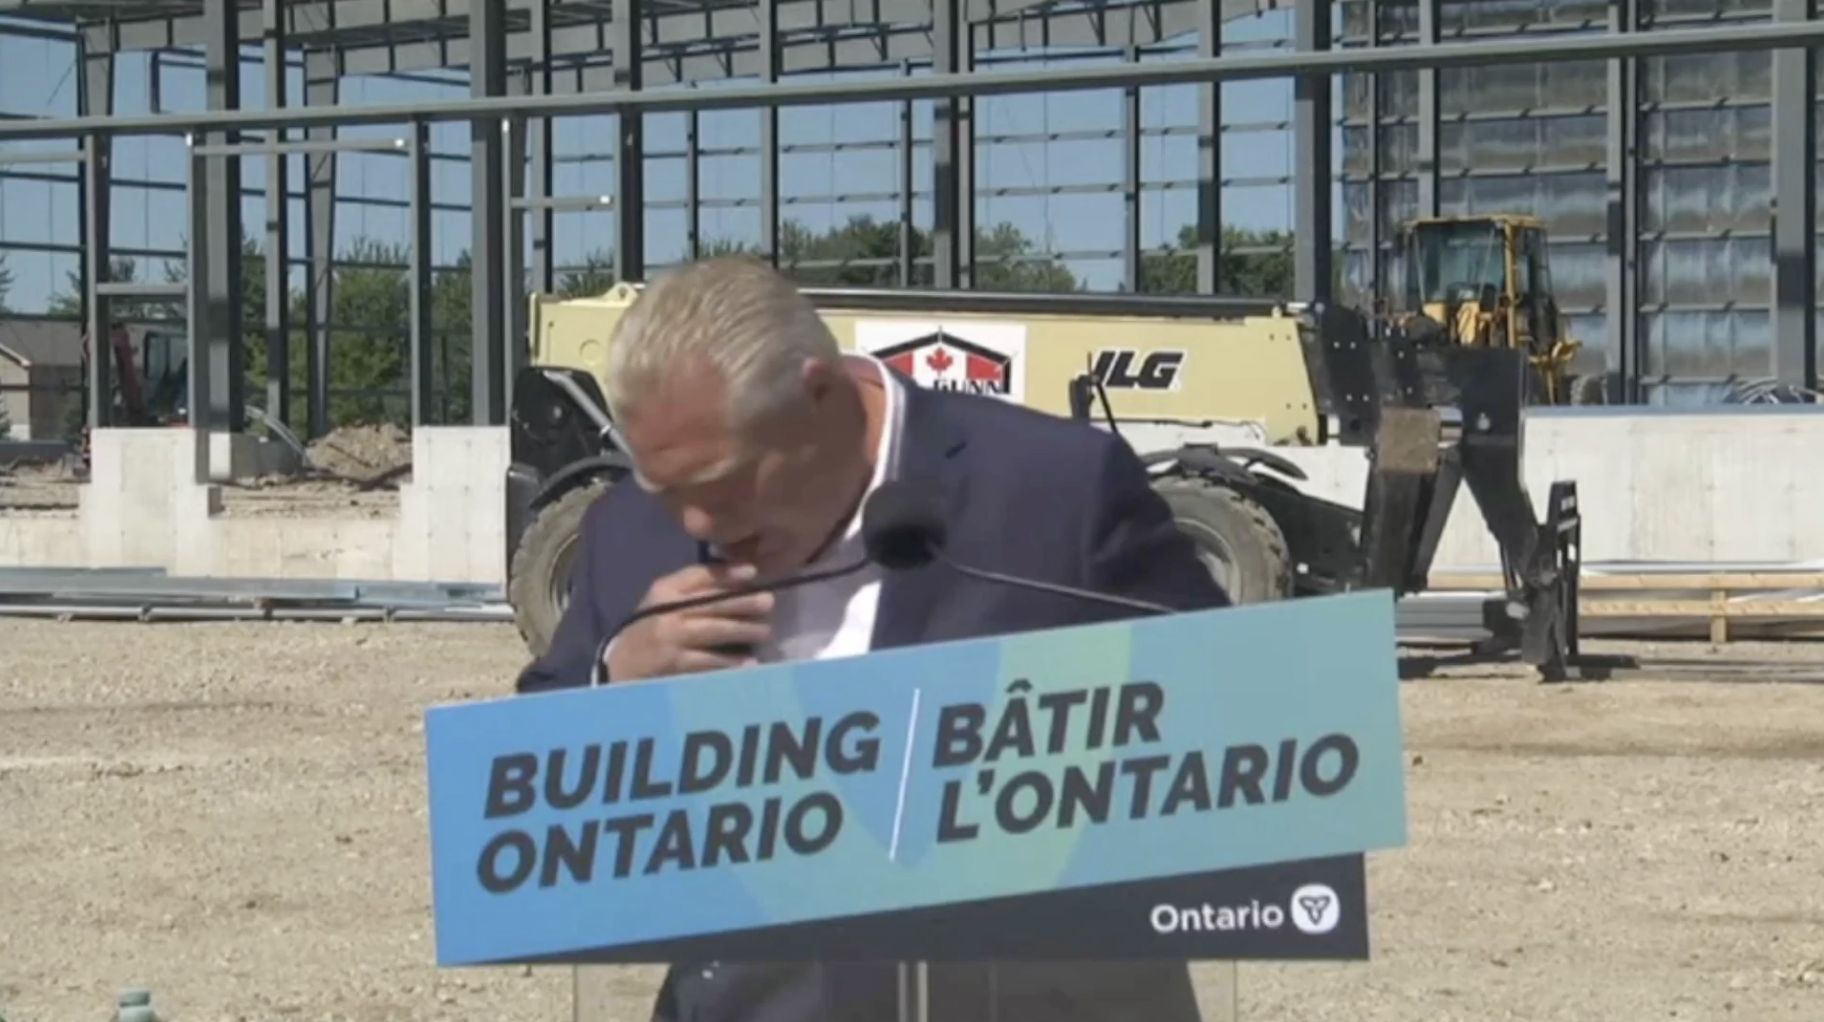 DUNDALK - Aug, 12, 2022 - Premier of Ontario Doug Ford reacts after swallowing a bee during a press conference. Premier of Ontario YouTube